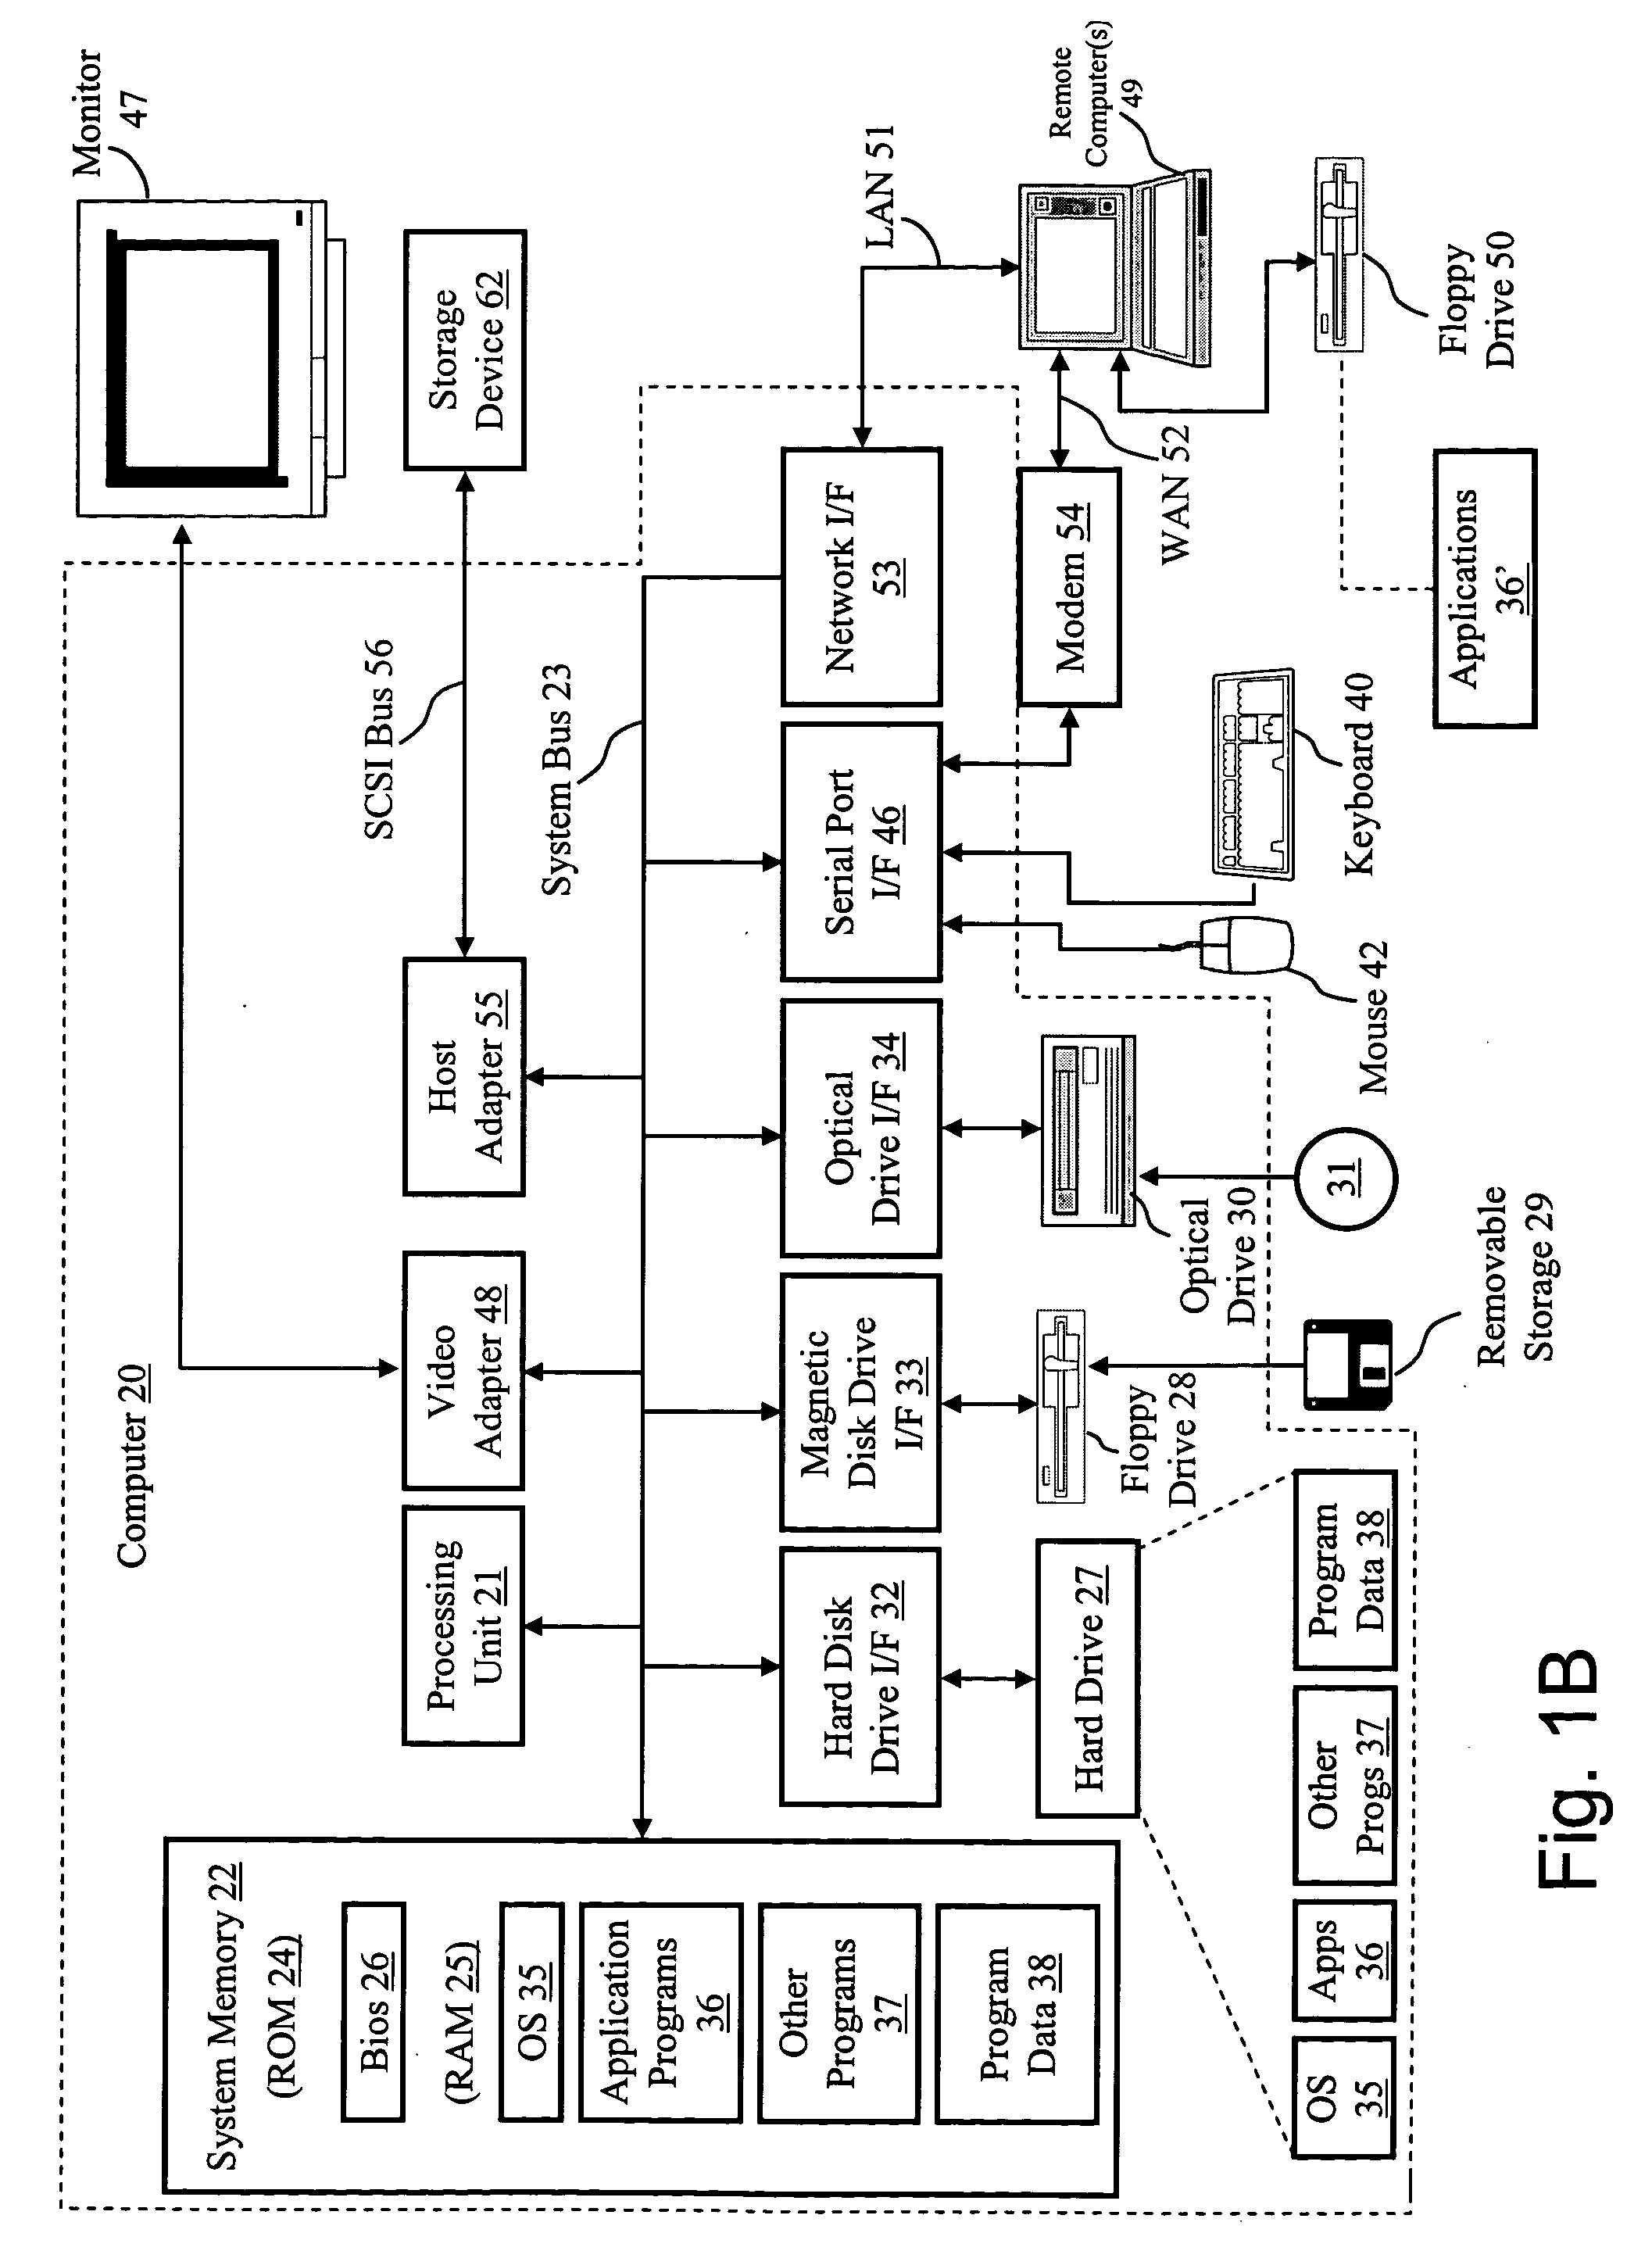 Systems and methods for instruction sequence compounding in a virtual machine environment